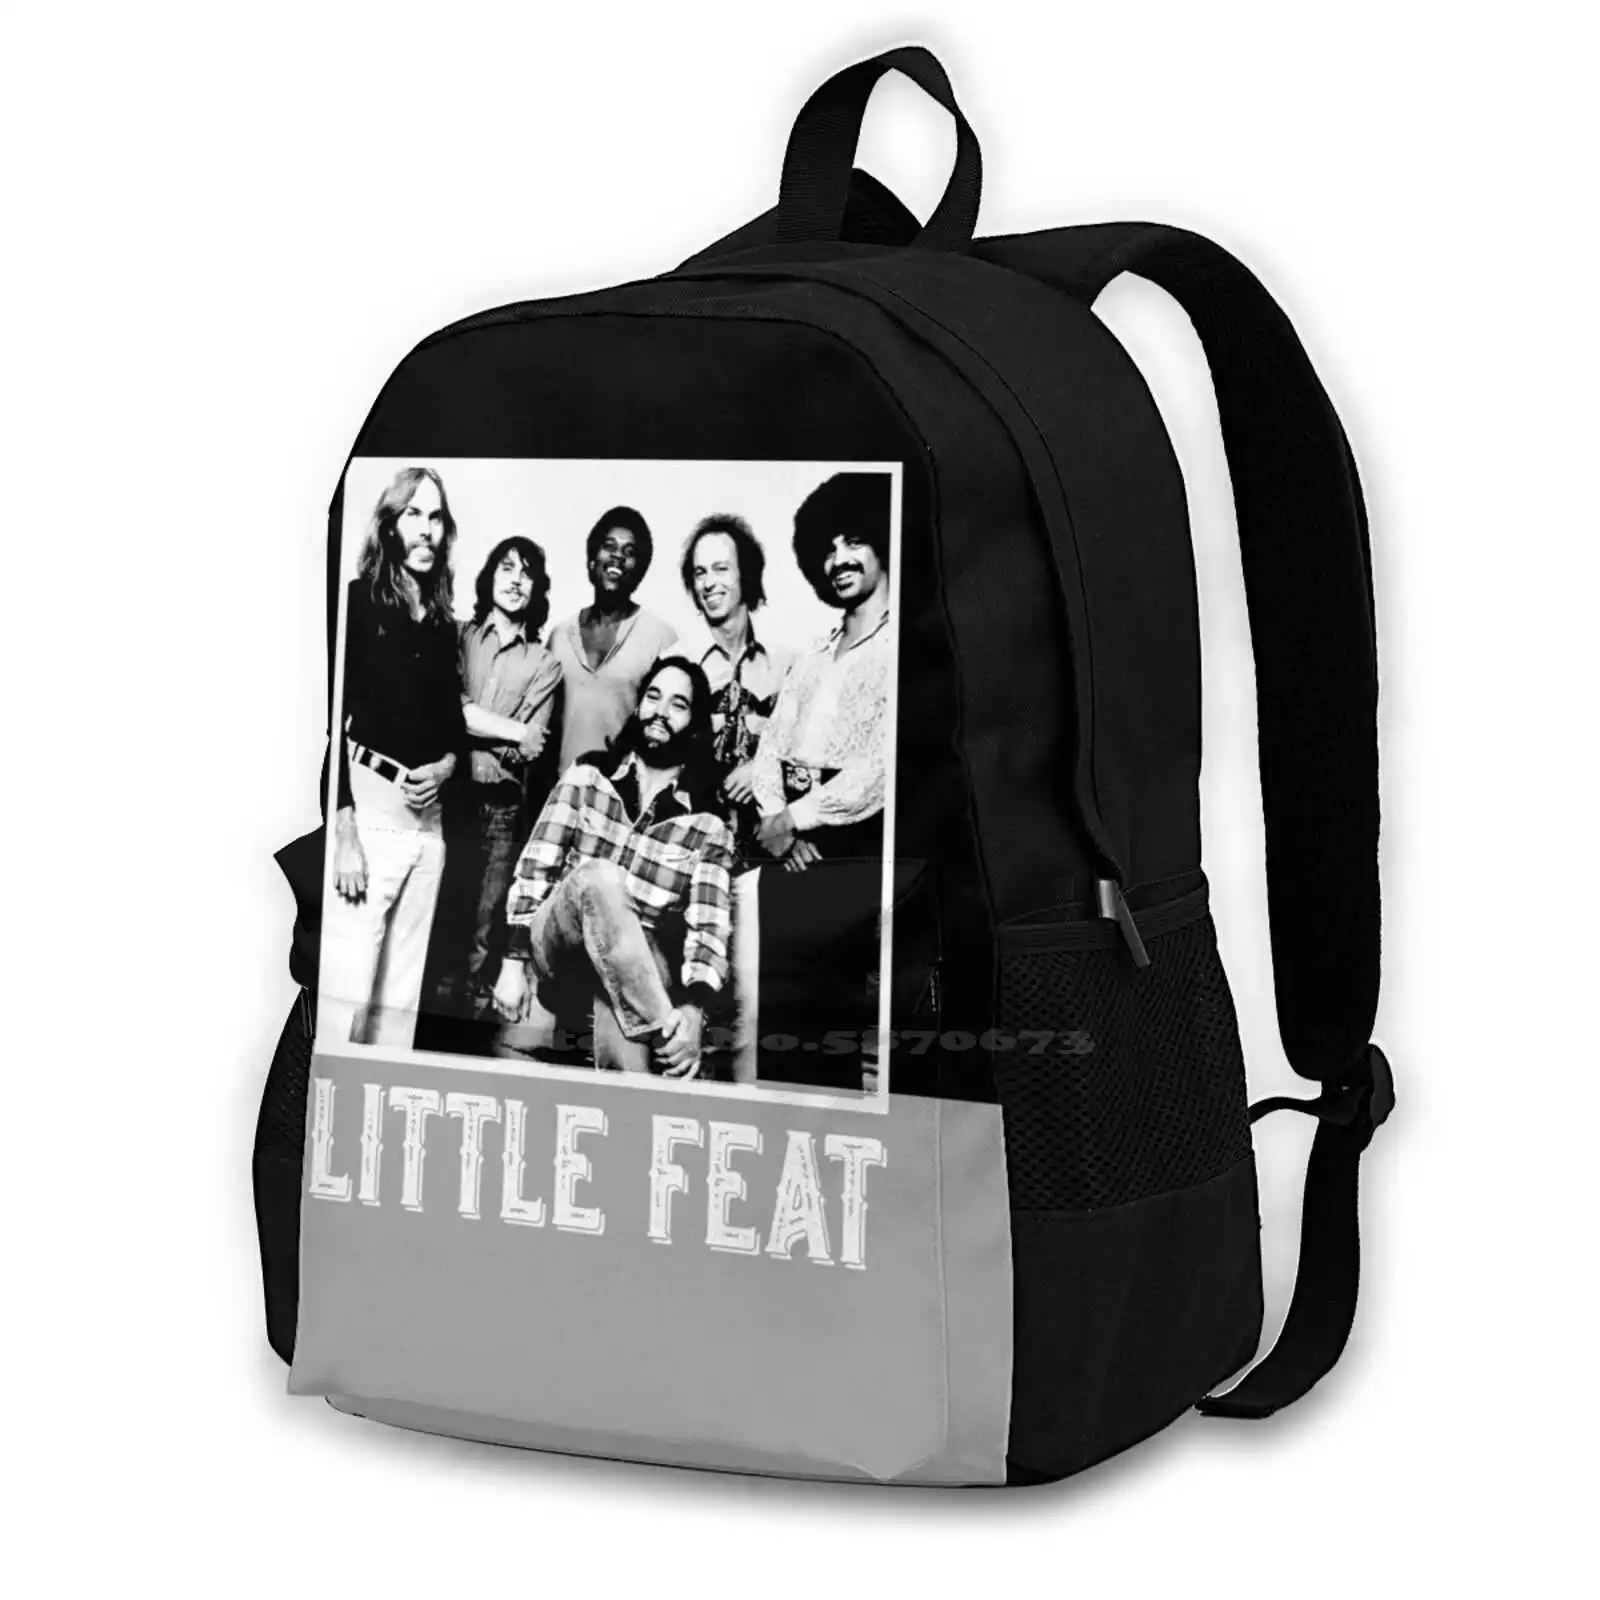 

Little Feat 2 Backpacks For Men Women Teenagers Girls Bags Little Feat 1970 Roots Dixie Chic Psychedelic Music Black Crowes Lsd